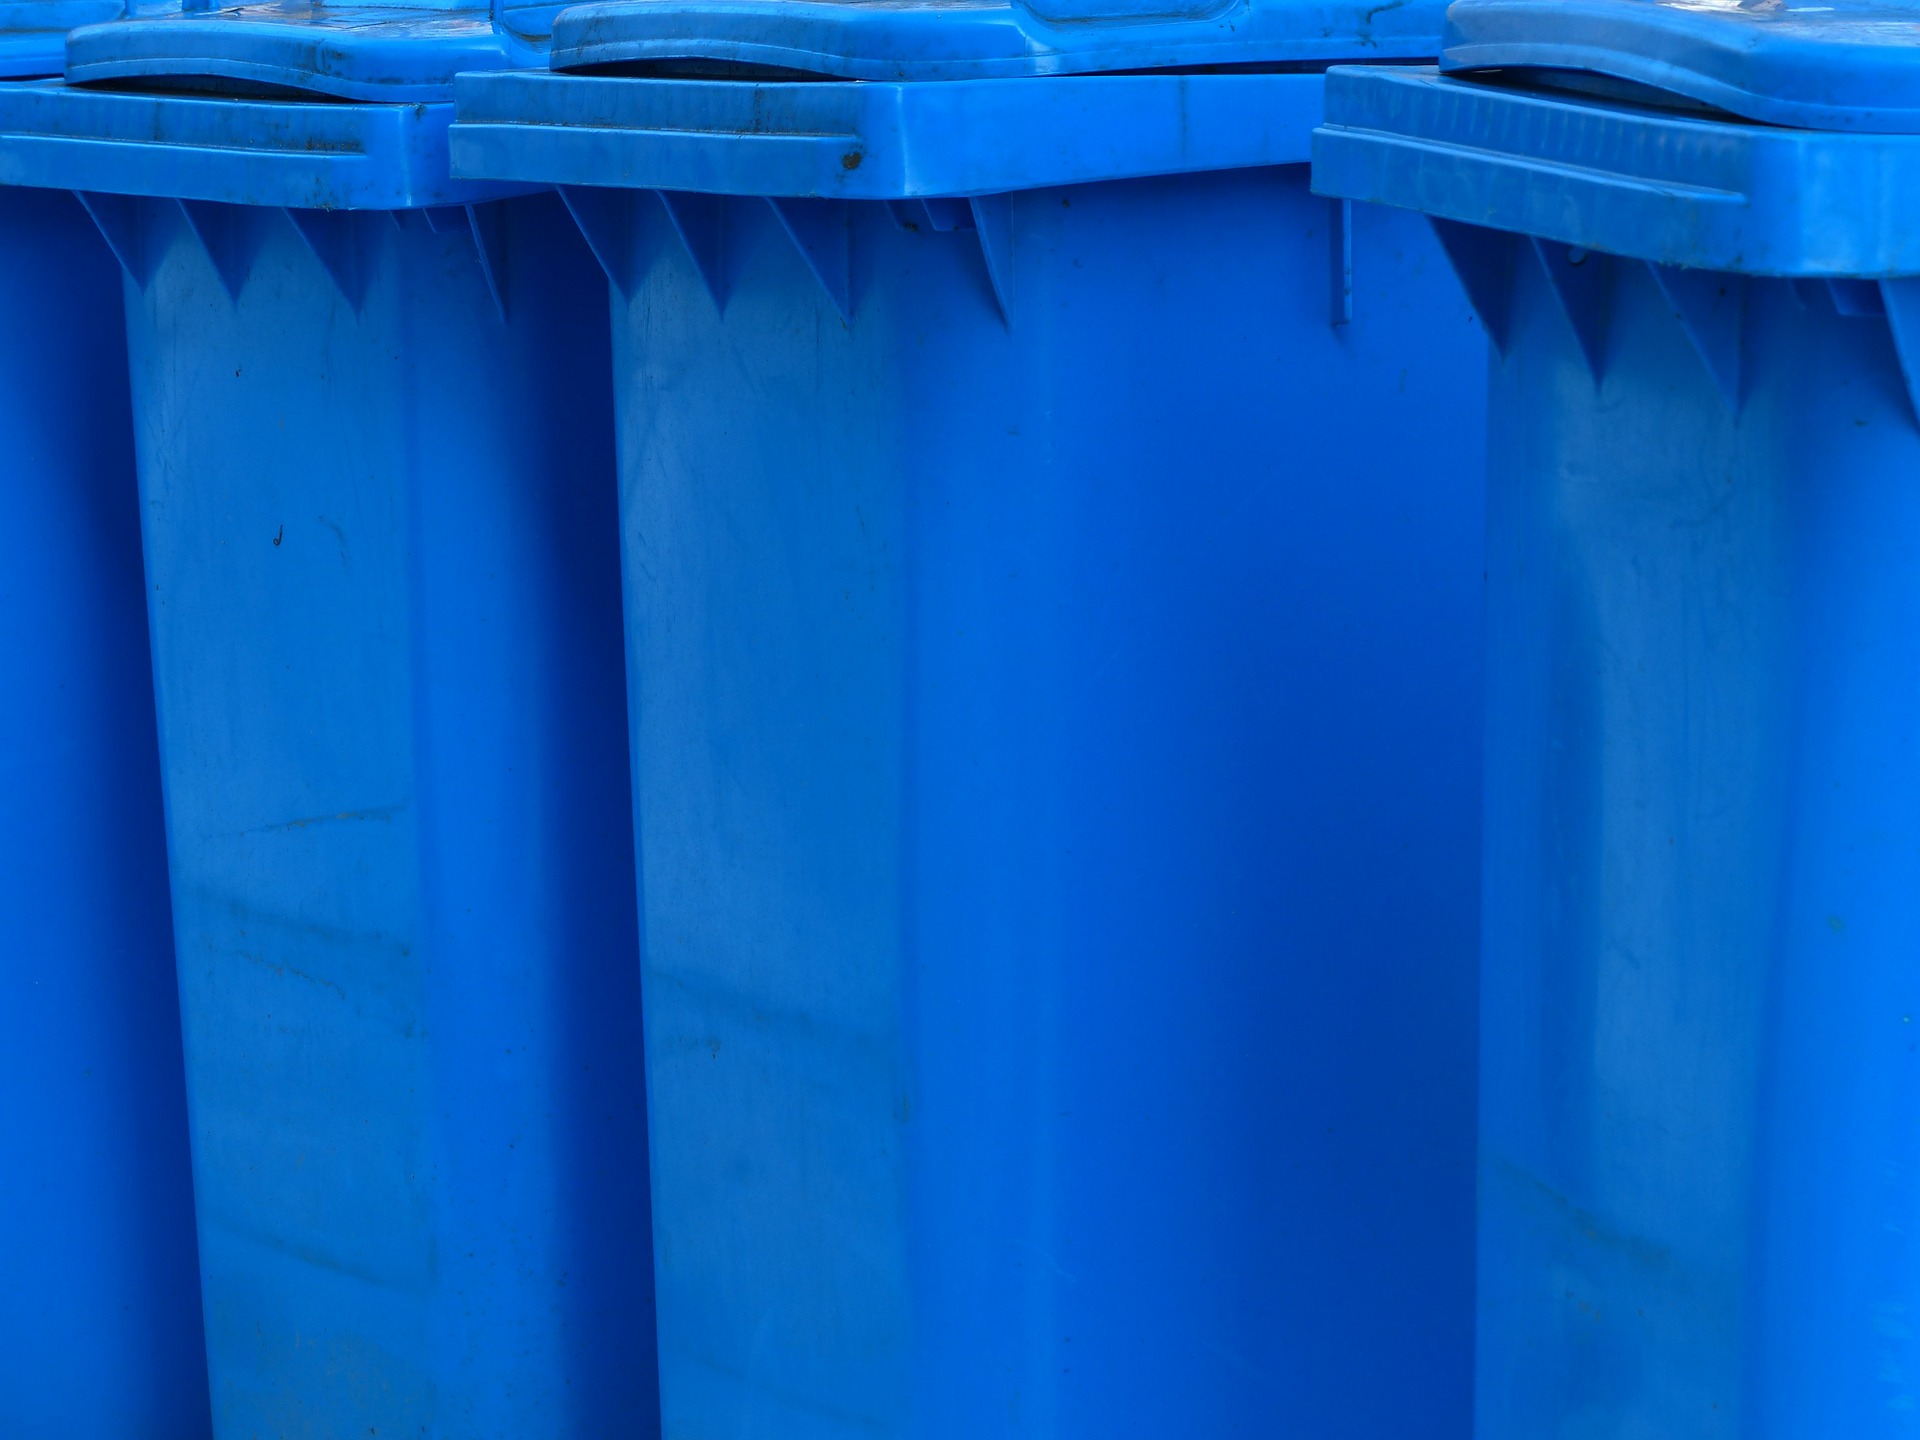 Pulborough Society meeting on recycling contents of blue bins